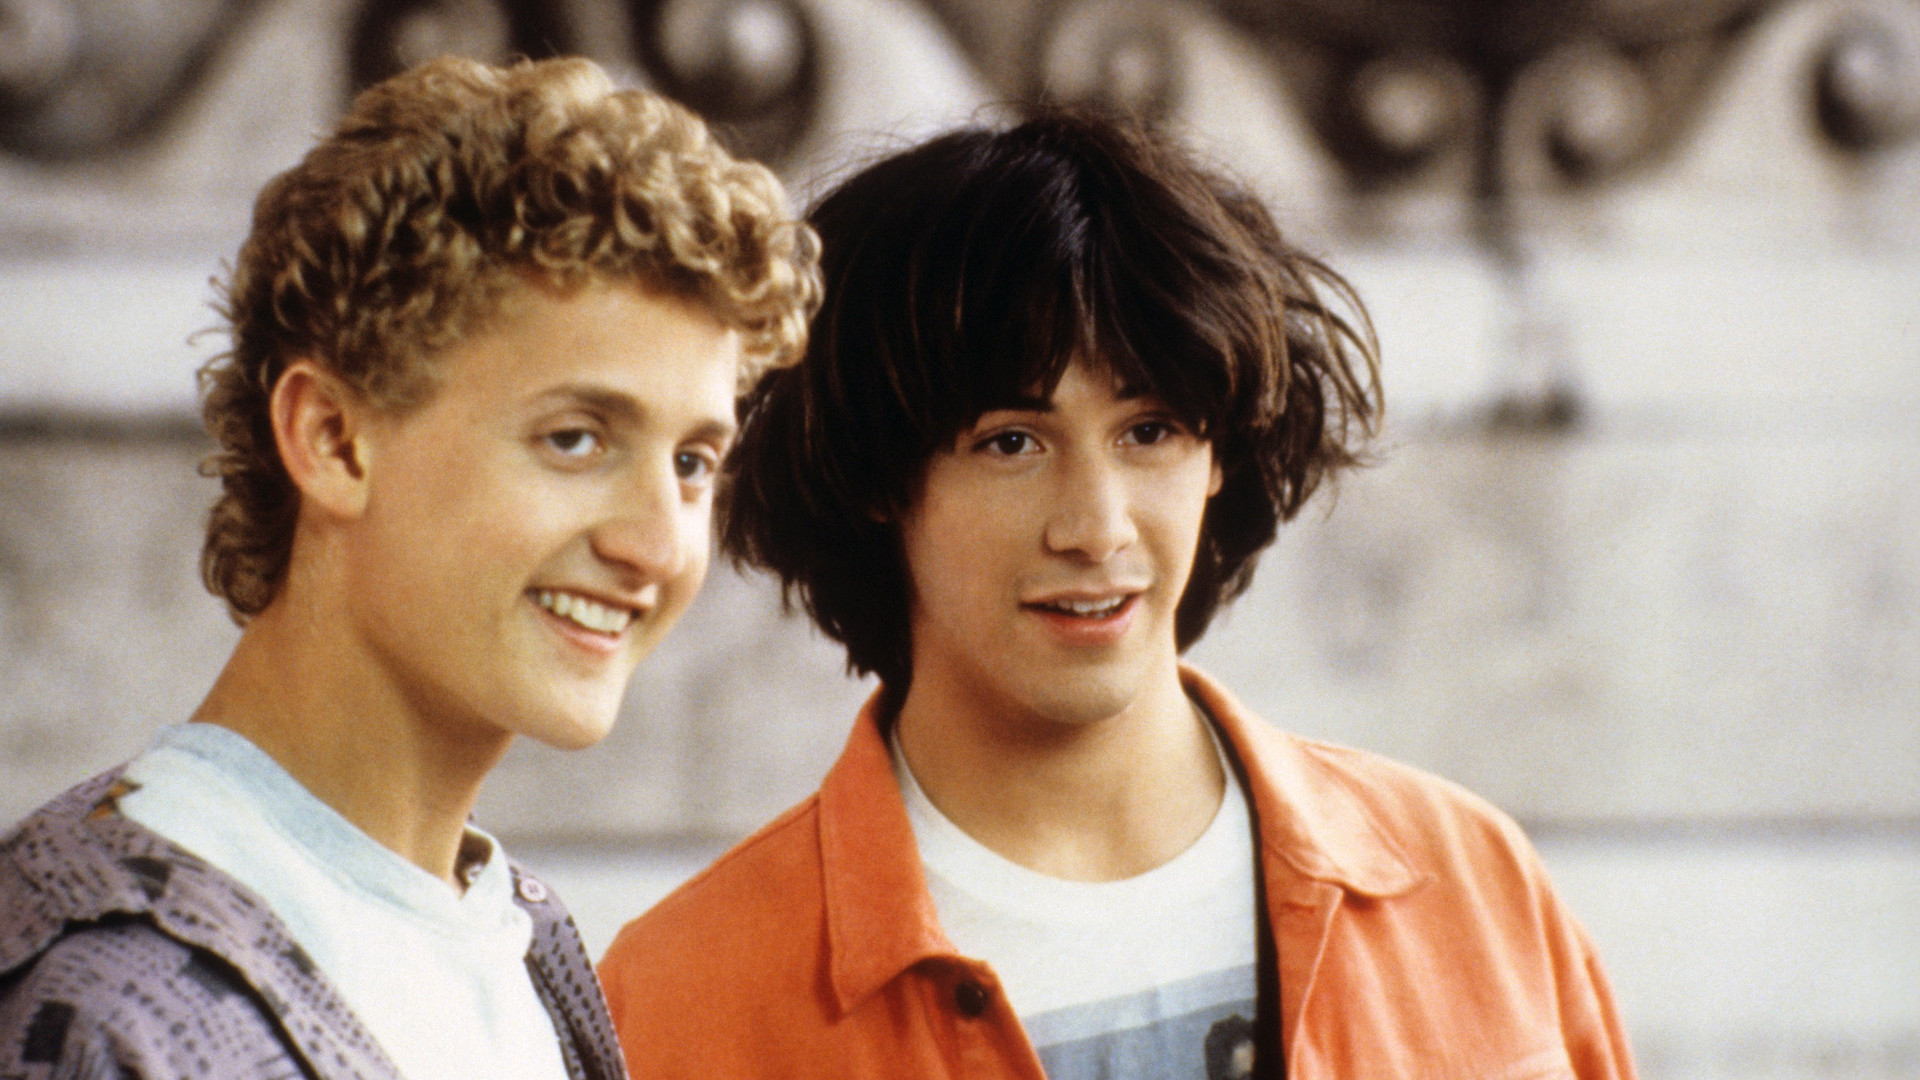 Bill-and-Ted-Excellent-Adventure.jpg